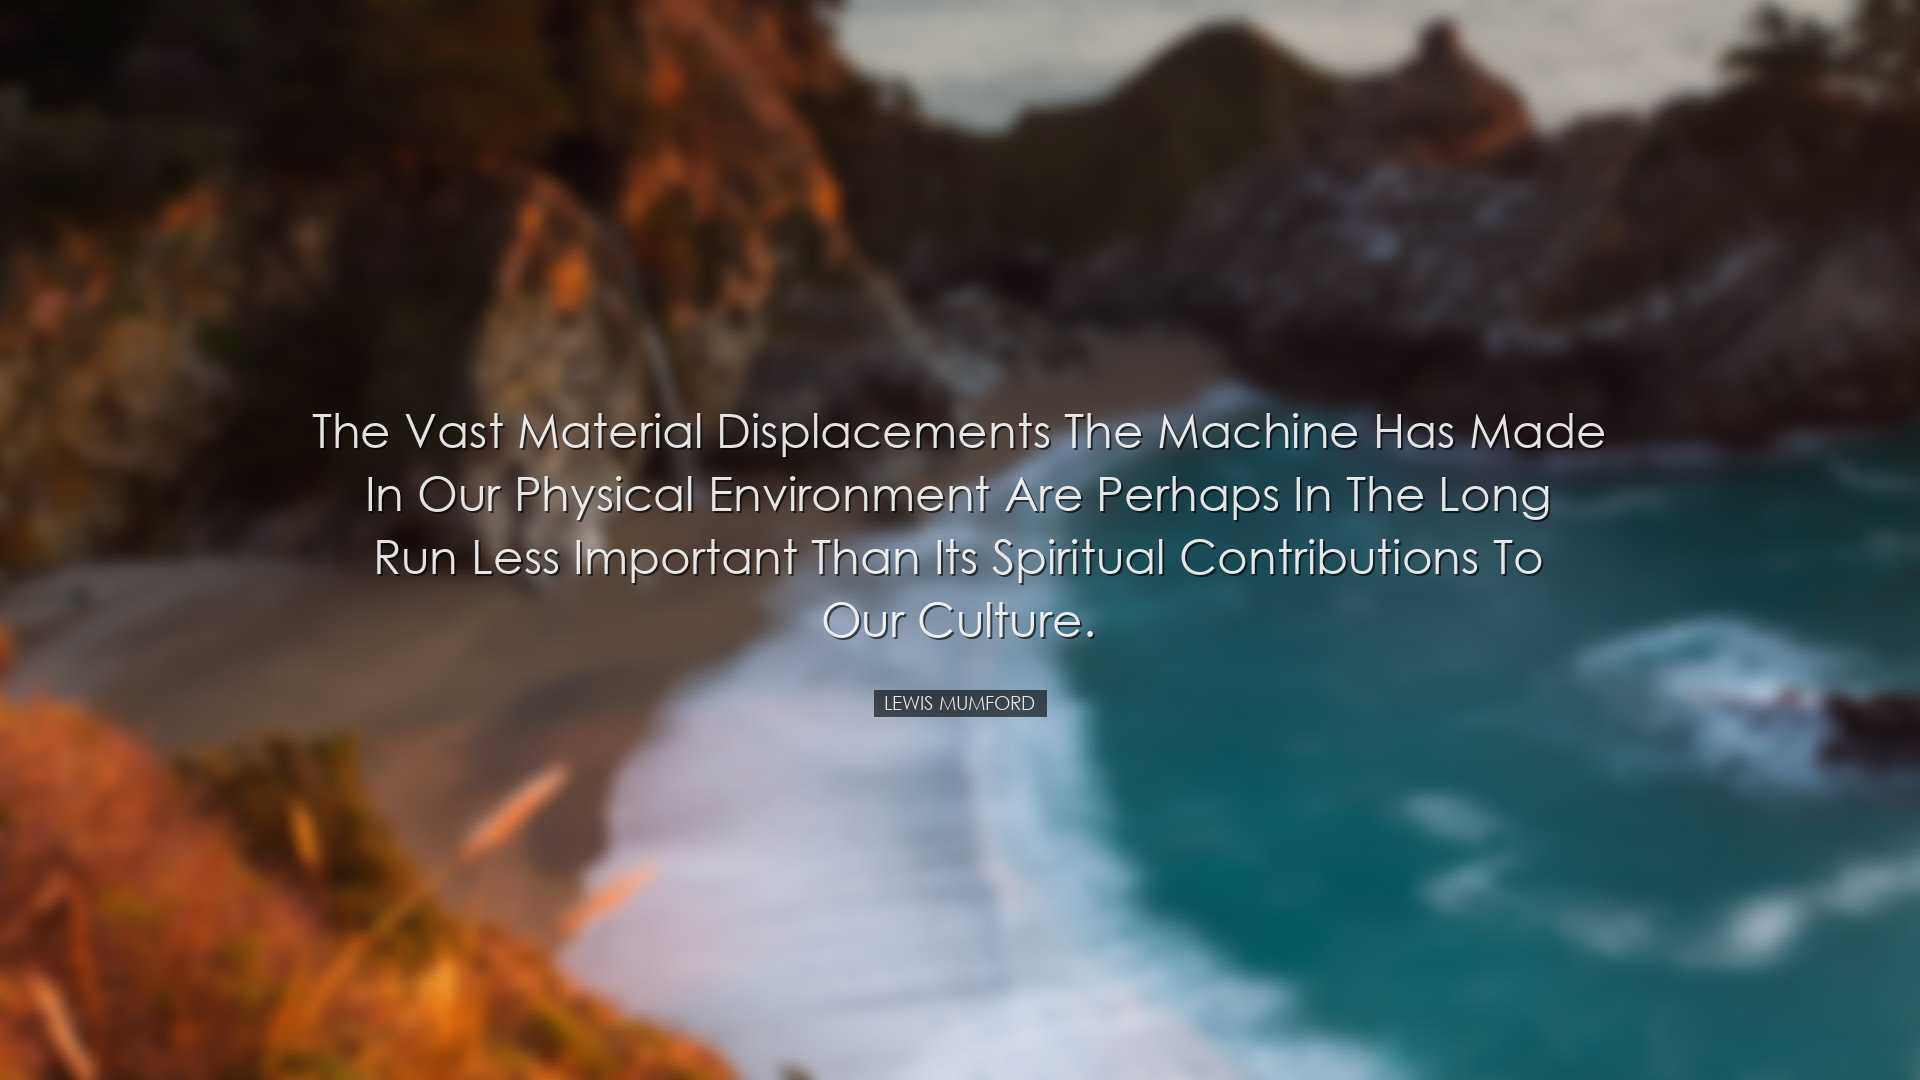 The vast material displacements the machine has made in our physic